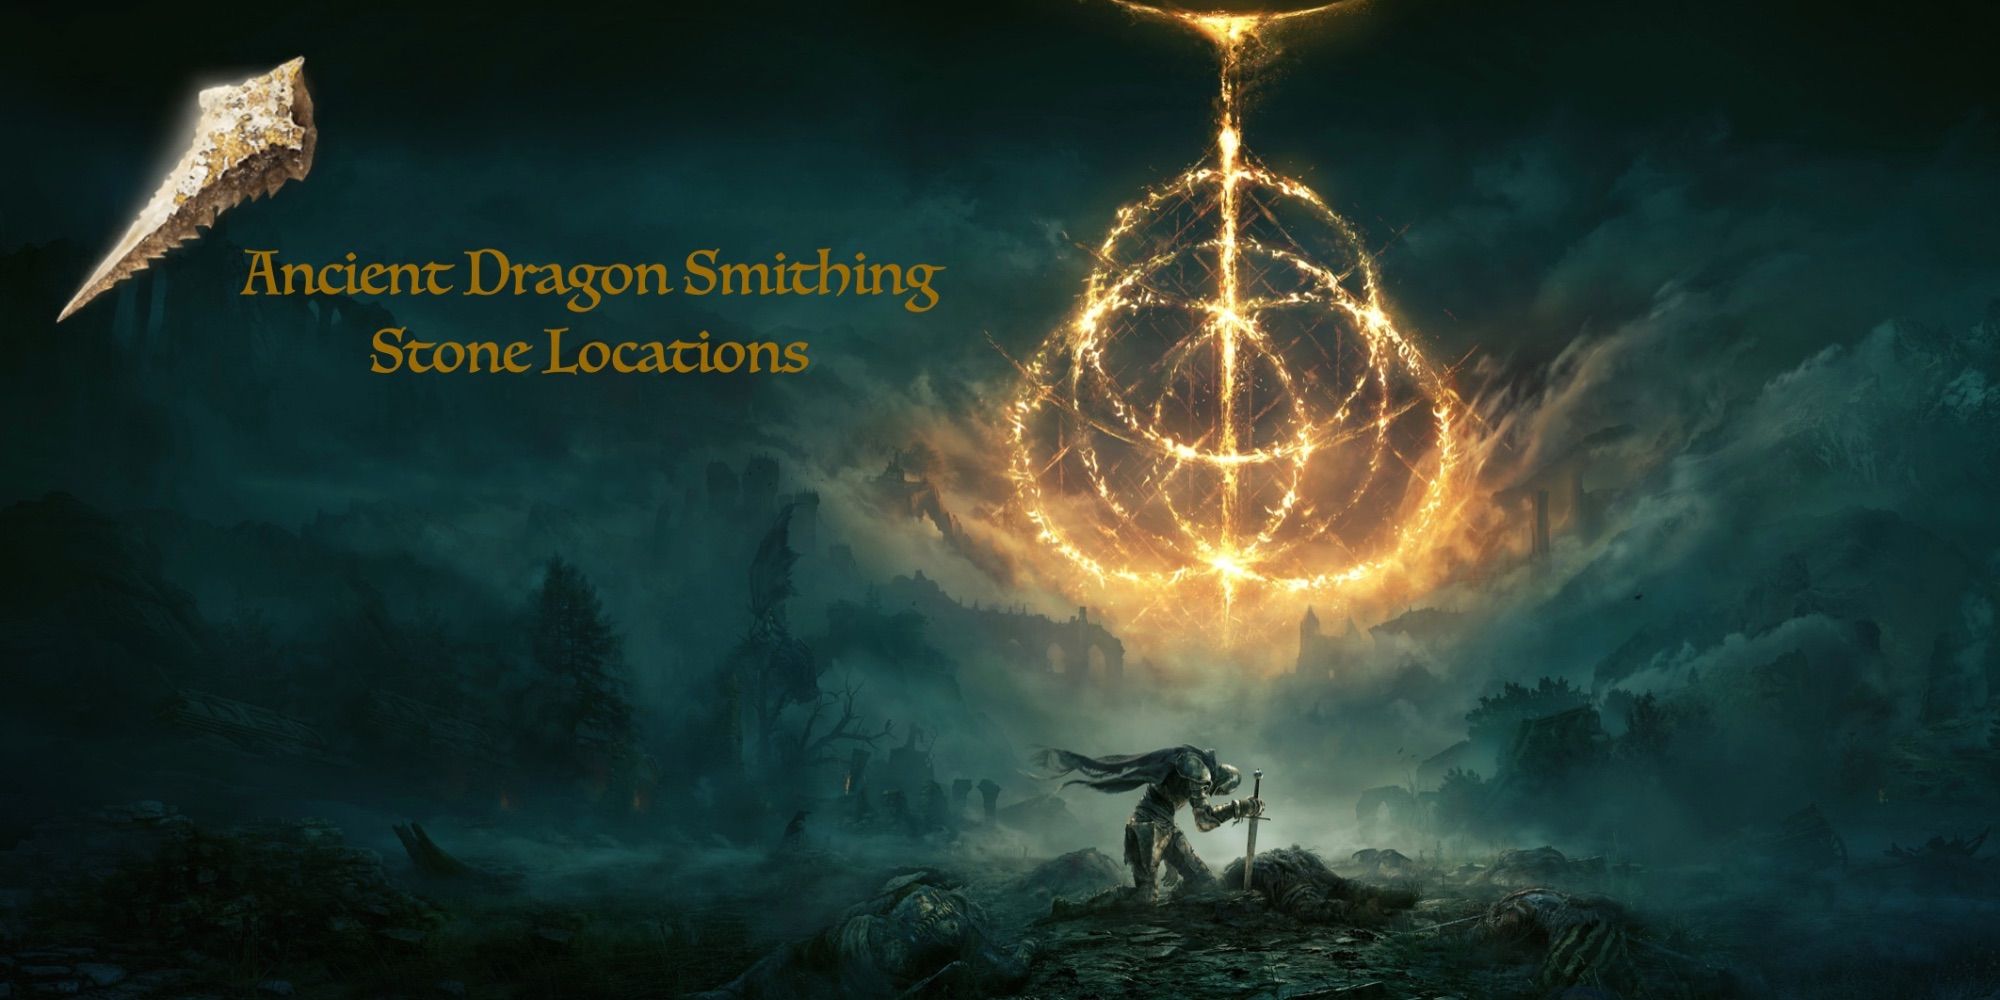 Elden Ring: All Ancient Dragon Smithing Stone Locations